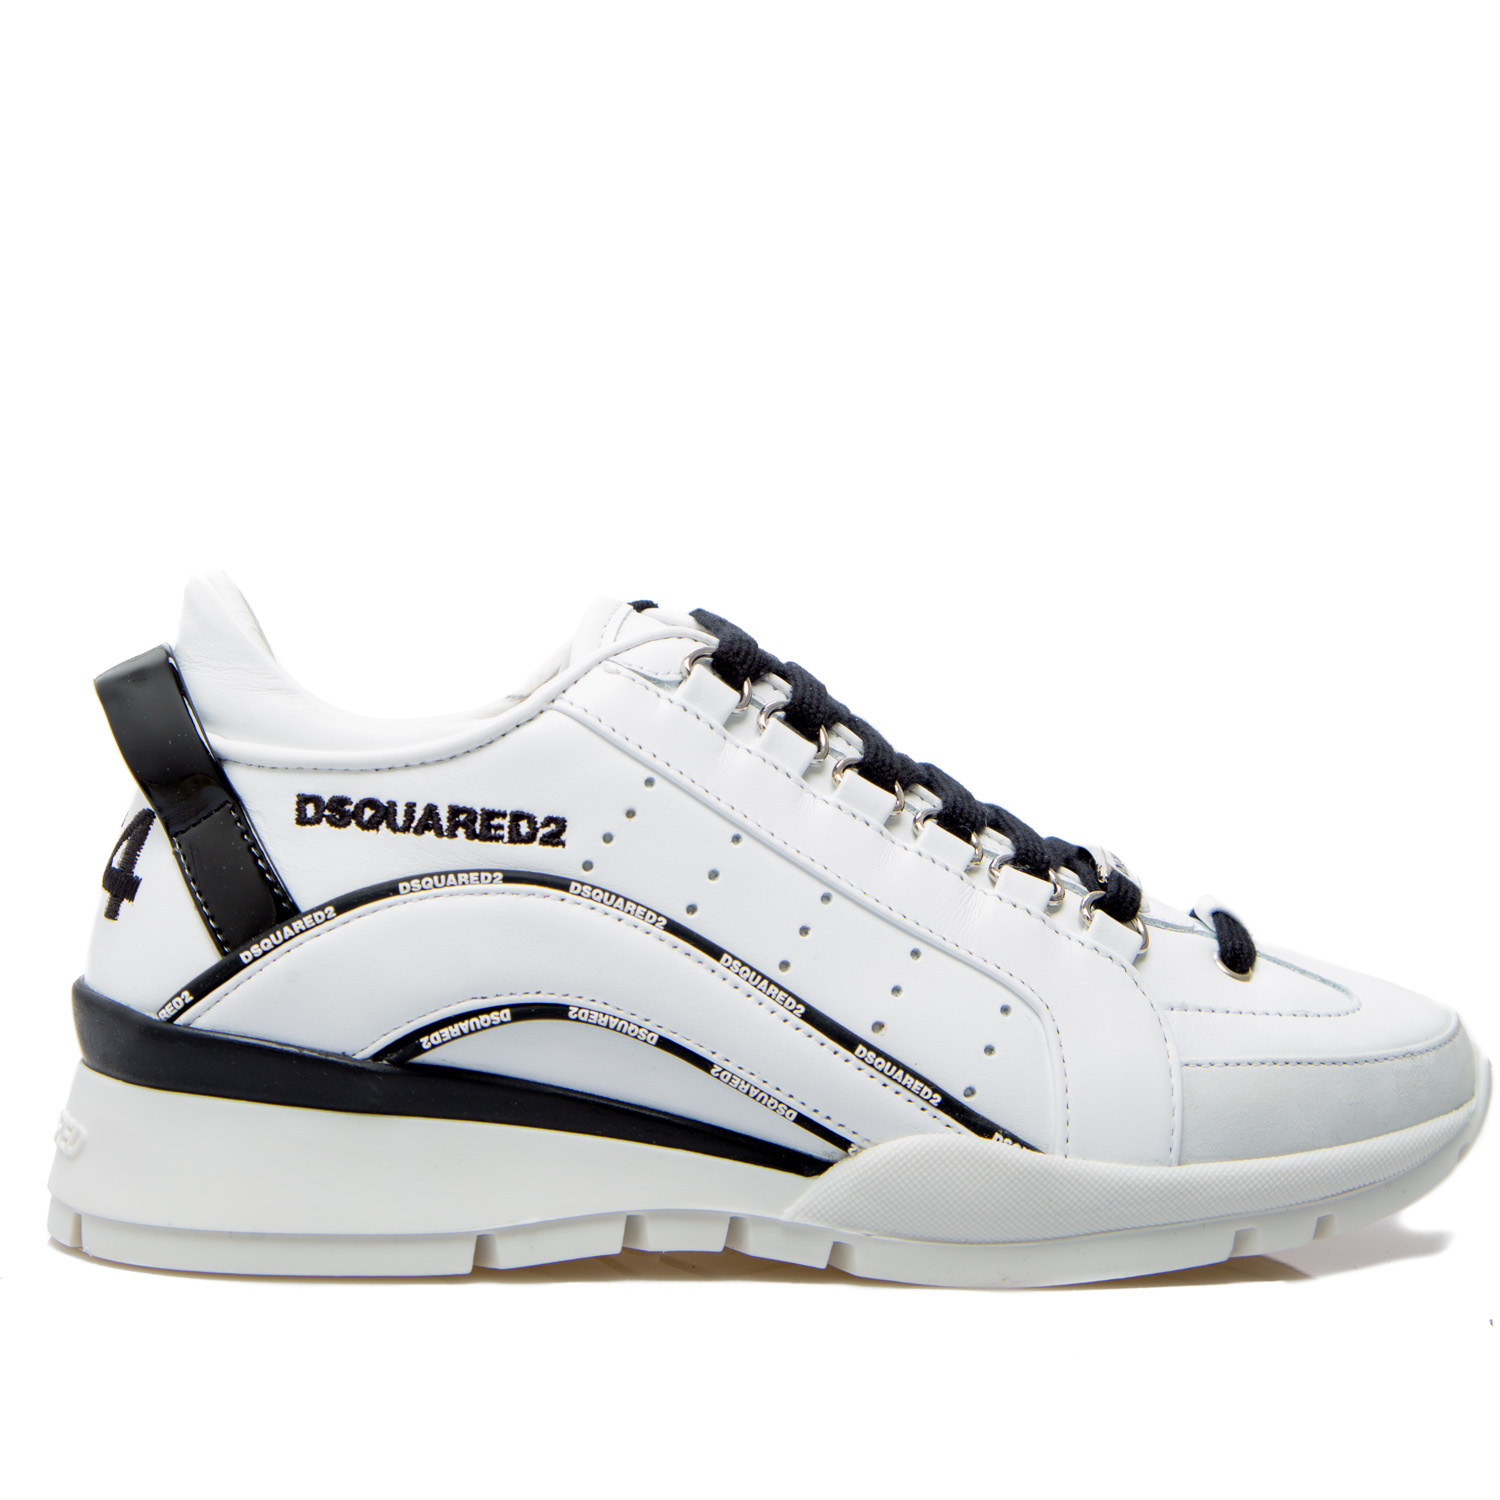 dsquared sneakers danes